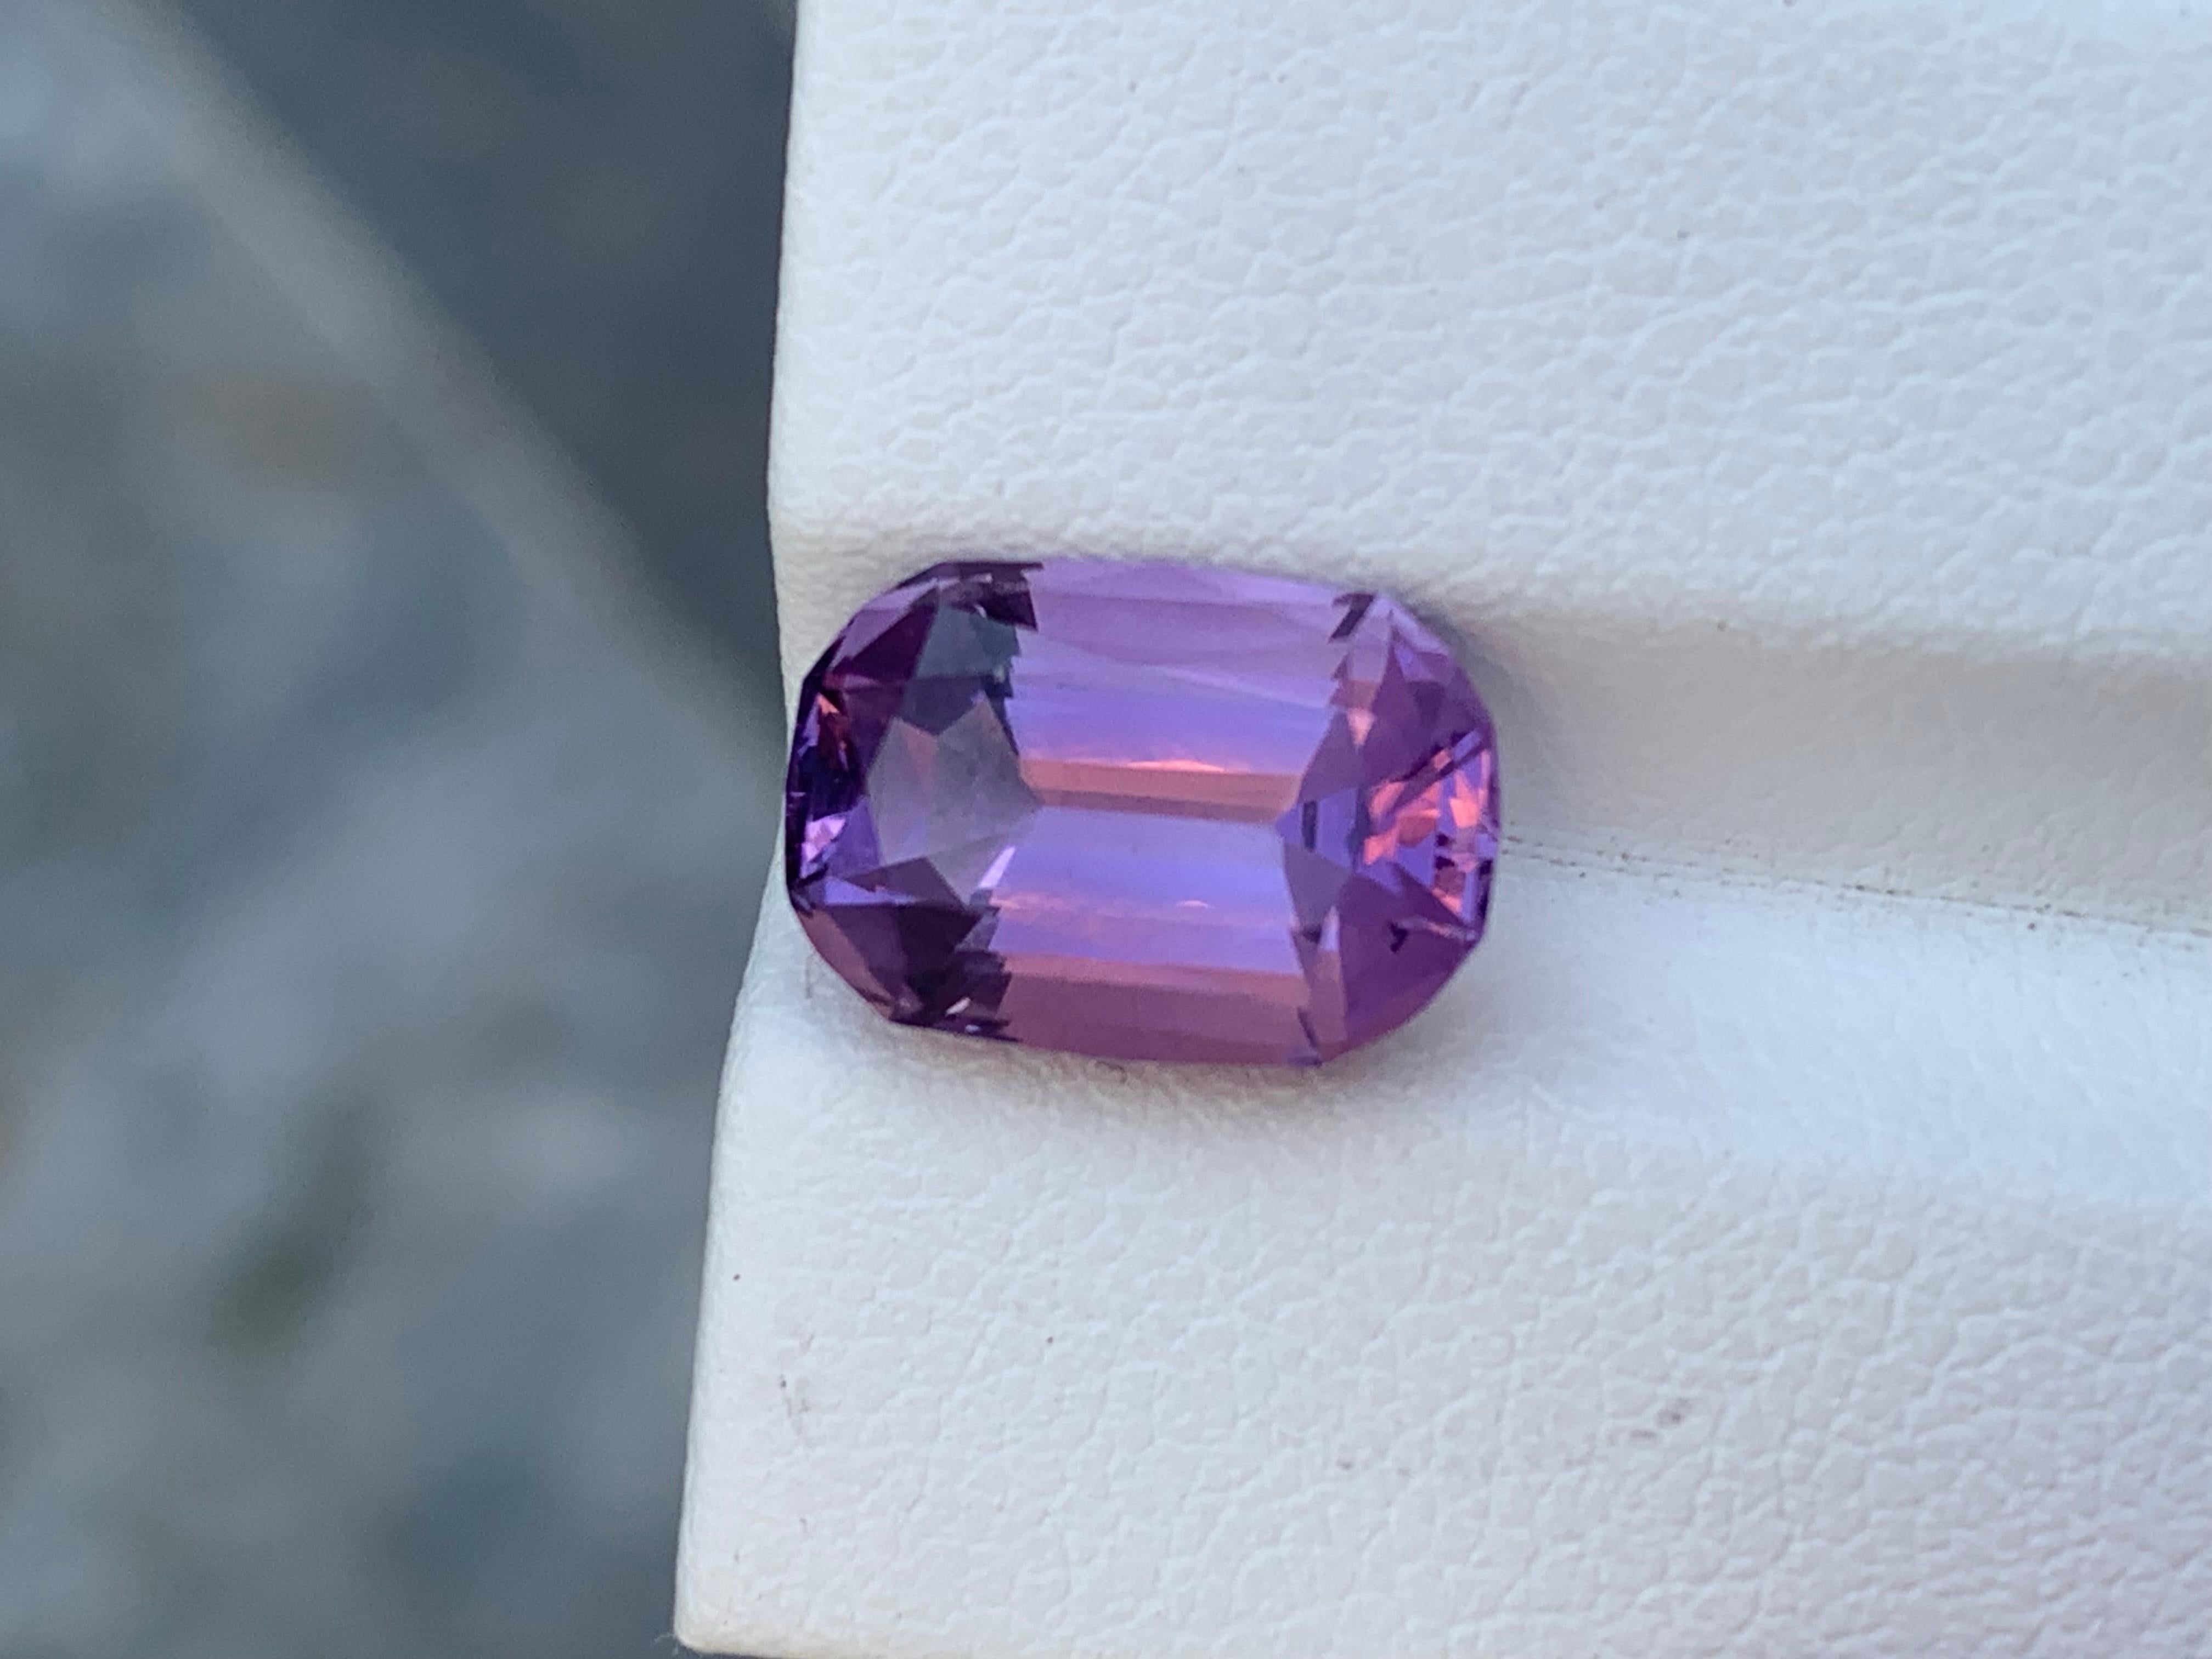 Loose Amethyst
Weight: 3.50 Carats
Dimension: 11.7 x 8 x 5.9 Mm
Colour: Purple
Origin: Brazil
Treatment: Non
Certificate: On Demand
Shape: Cushion 

Amethyst, a stunning variety of quartz known for its mesmerizing purple hue, has captivated humans